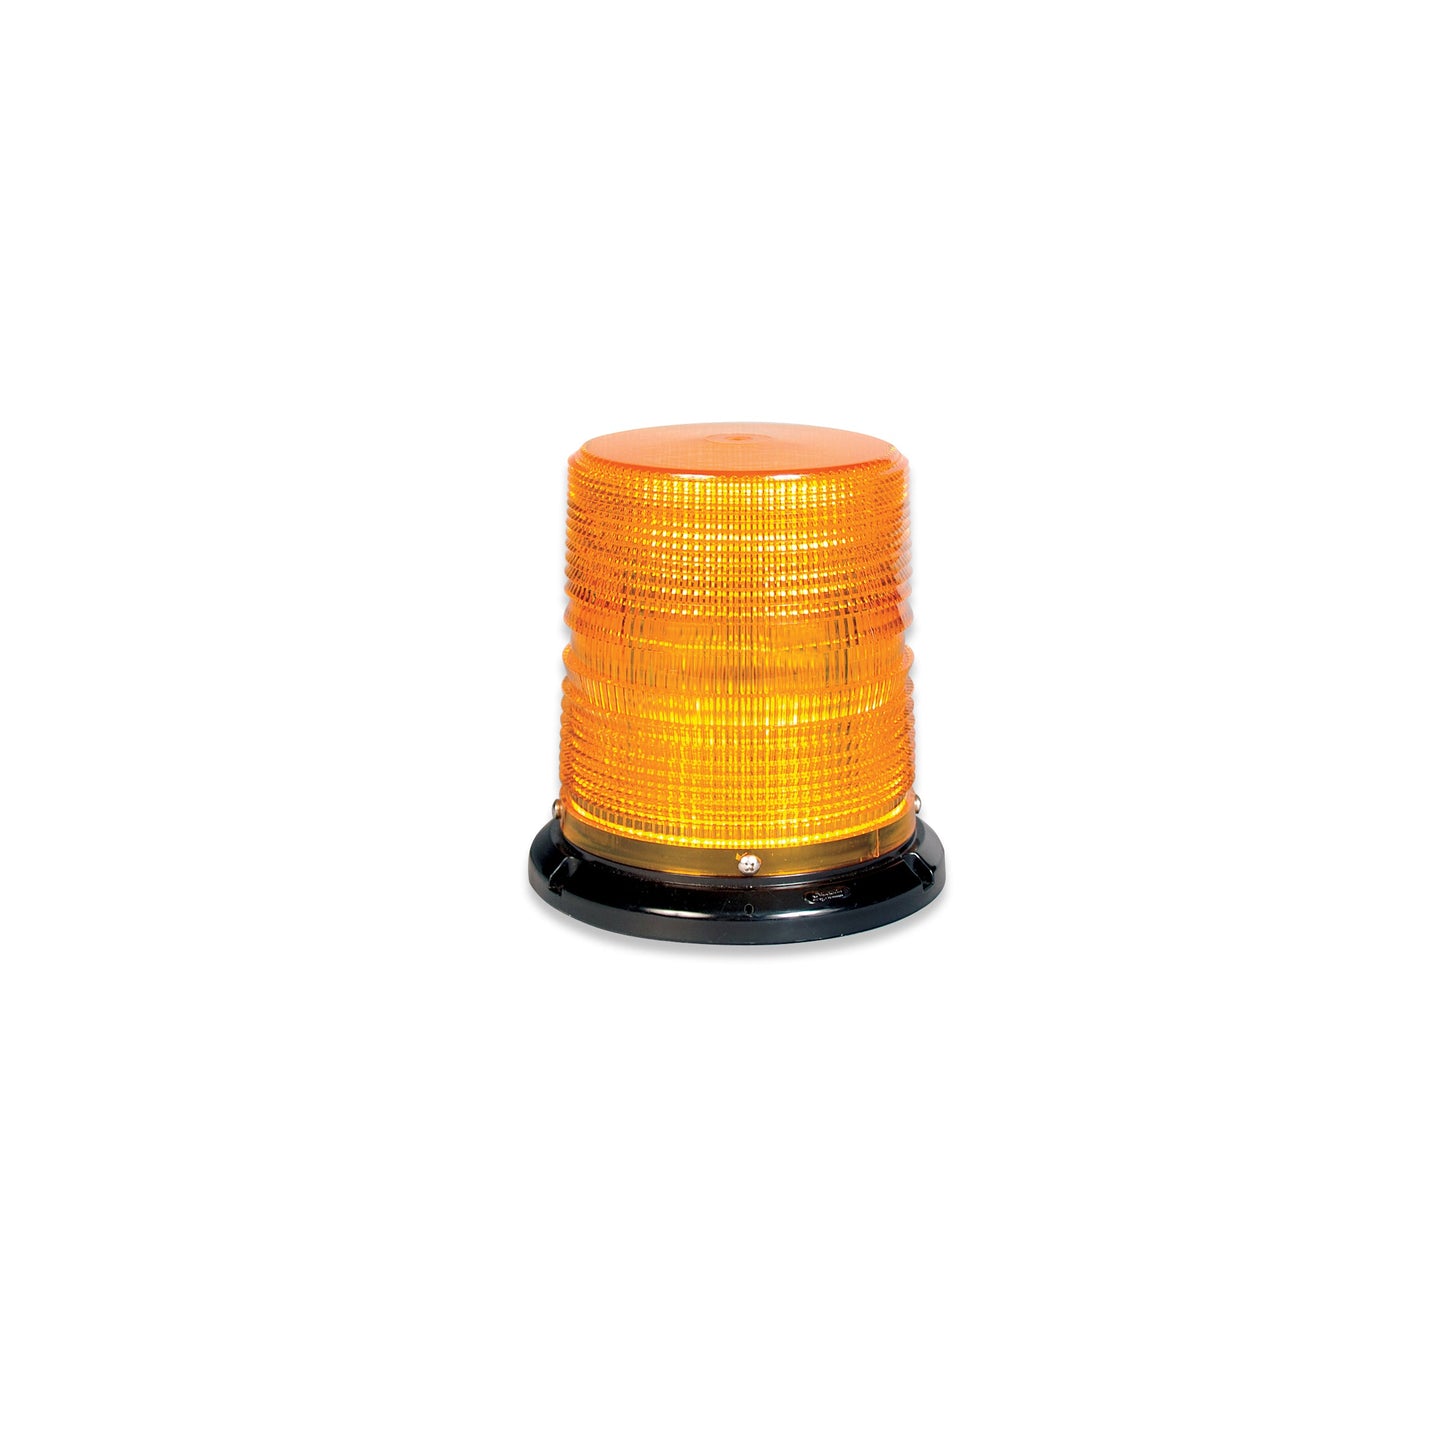 Soundoff Signal ELB45BCH0RR 4500 Series Led Beacon, 10-30V, Sae J845 Class 1 - Flat/Pipe Mount, 6" Red Dome/ Red Leds